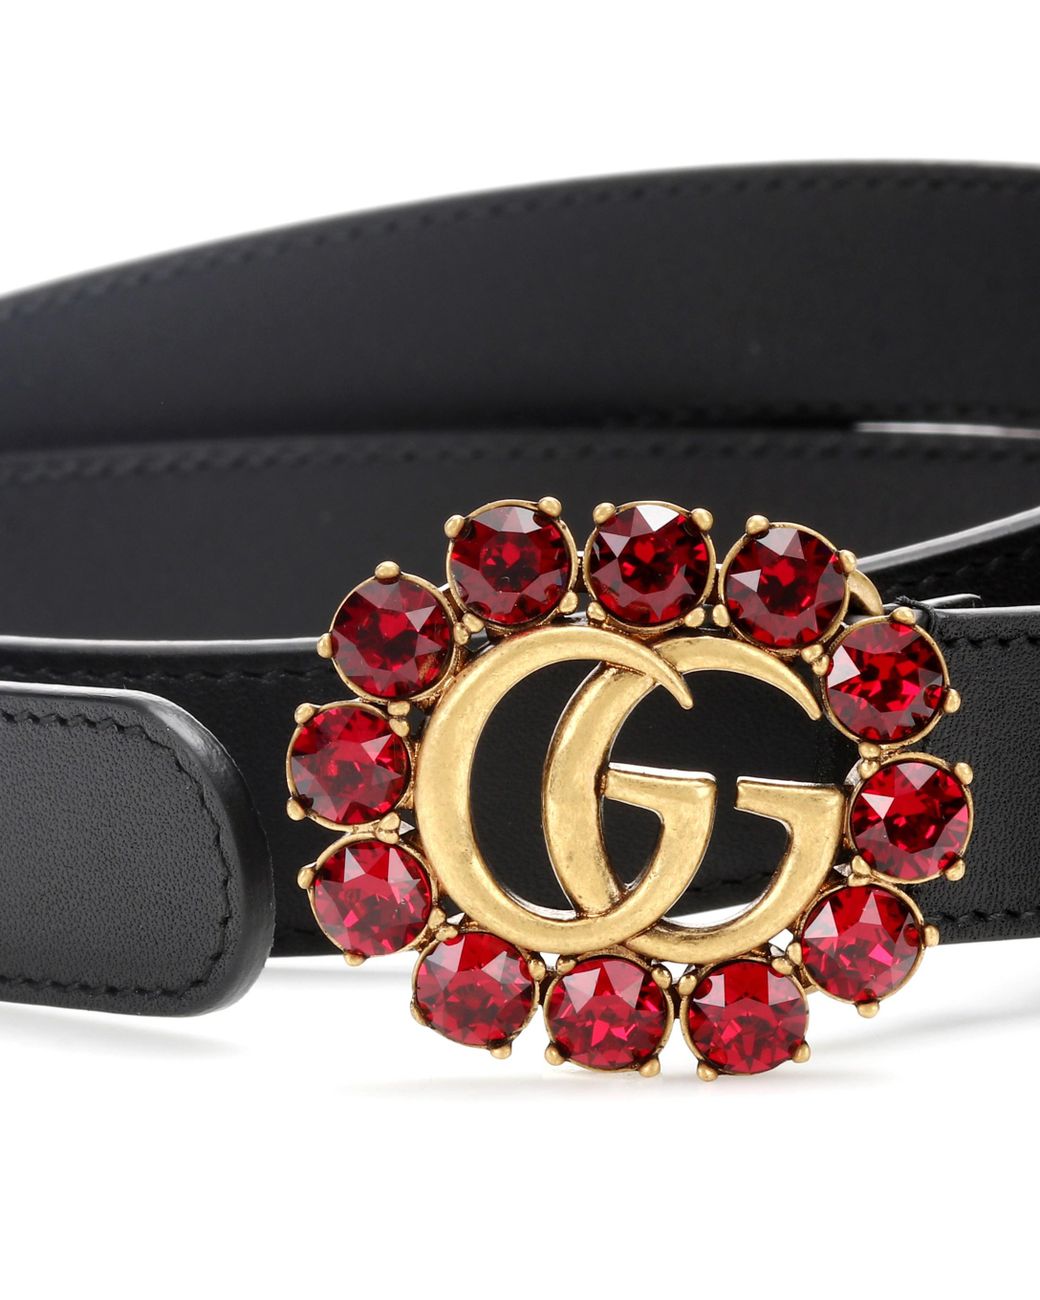 Gucci Leather Belt With Crystal Double G Buckle - Farfetch